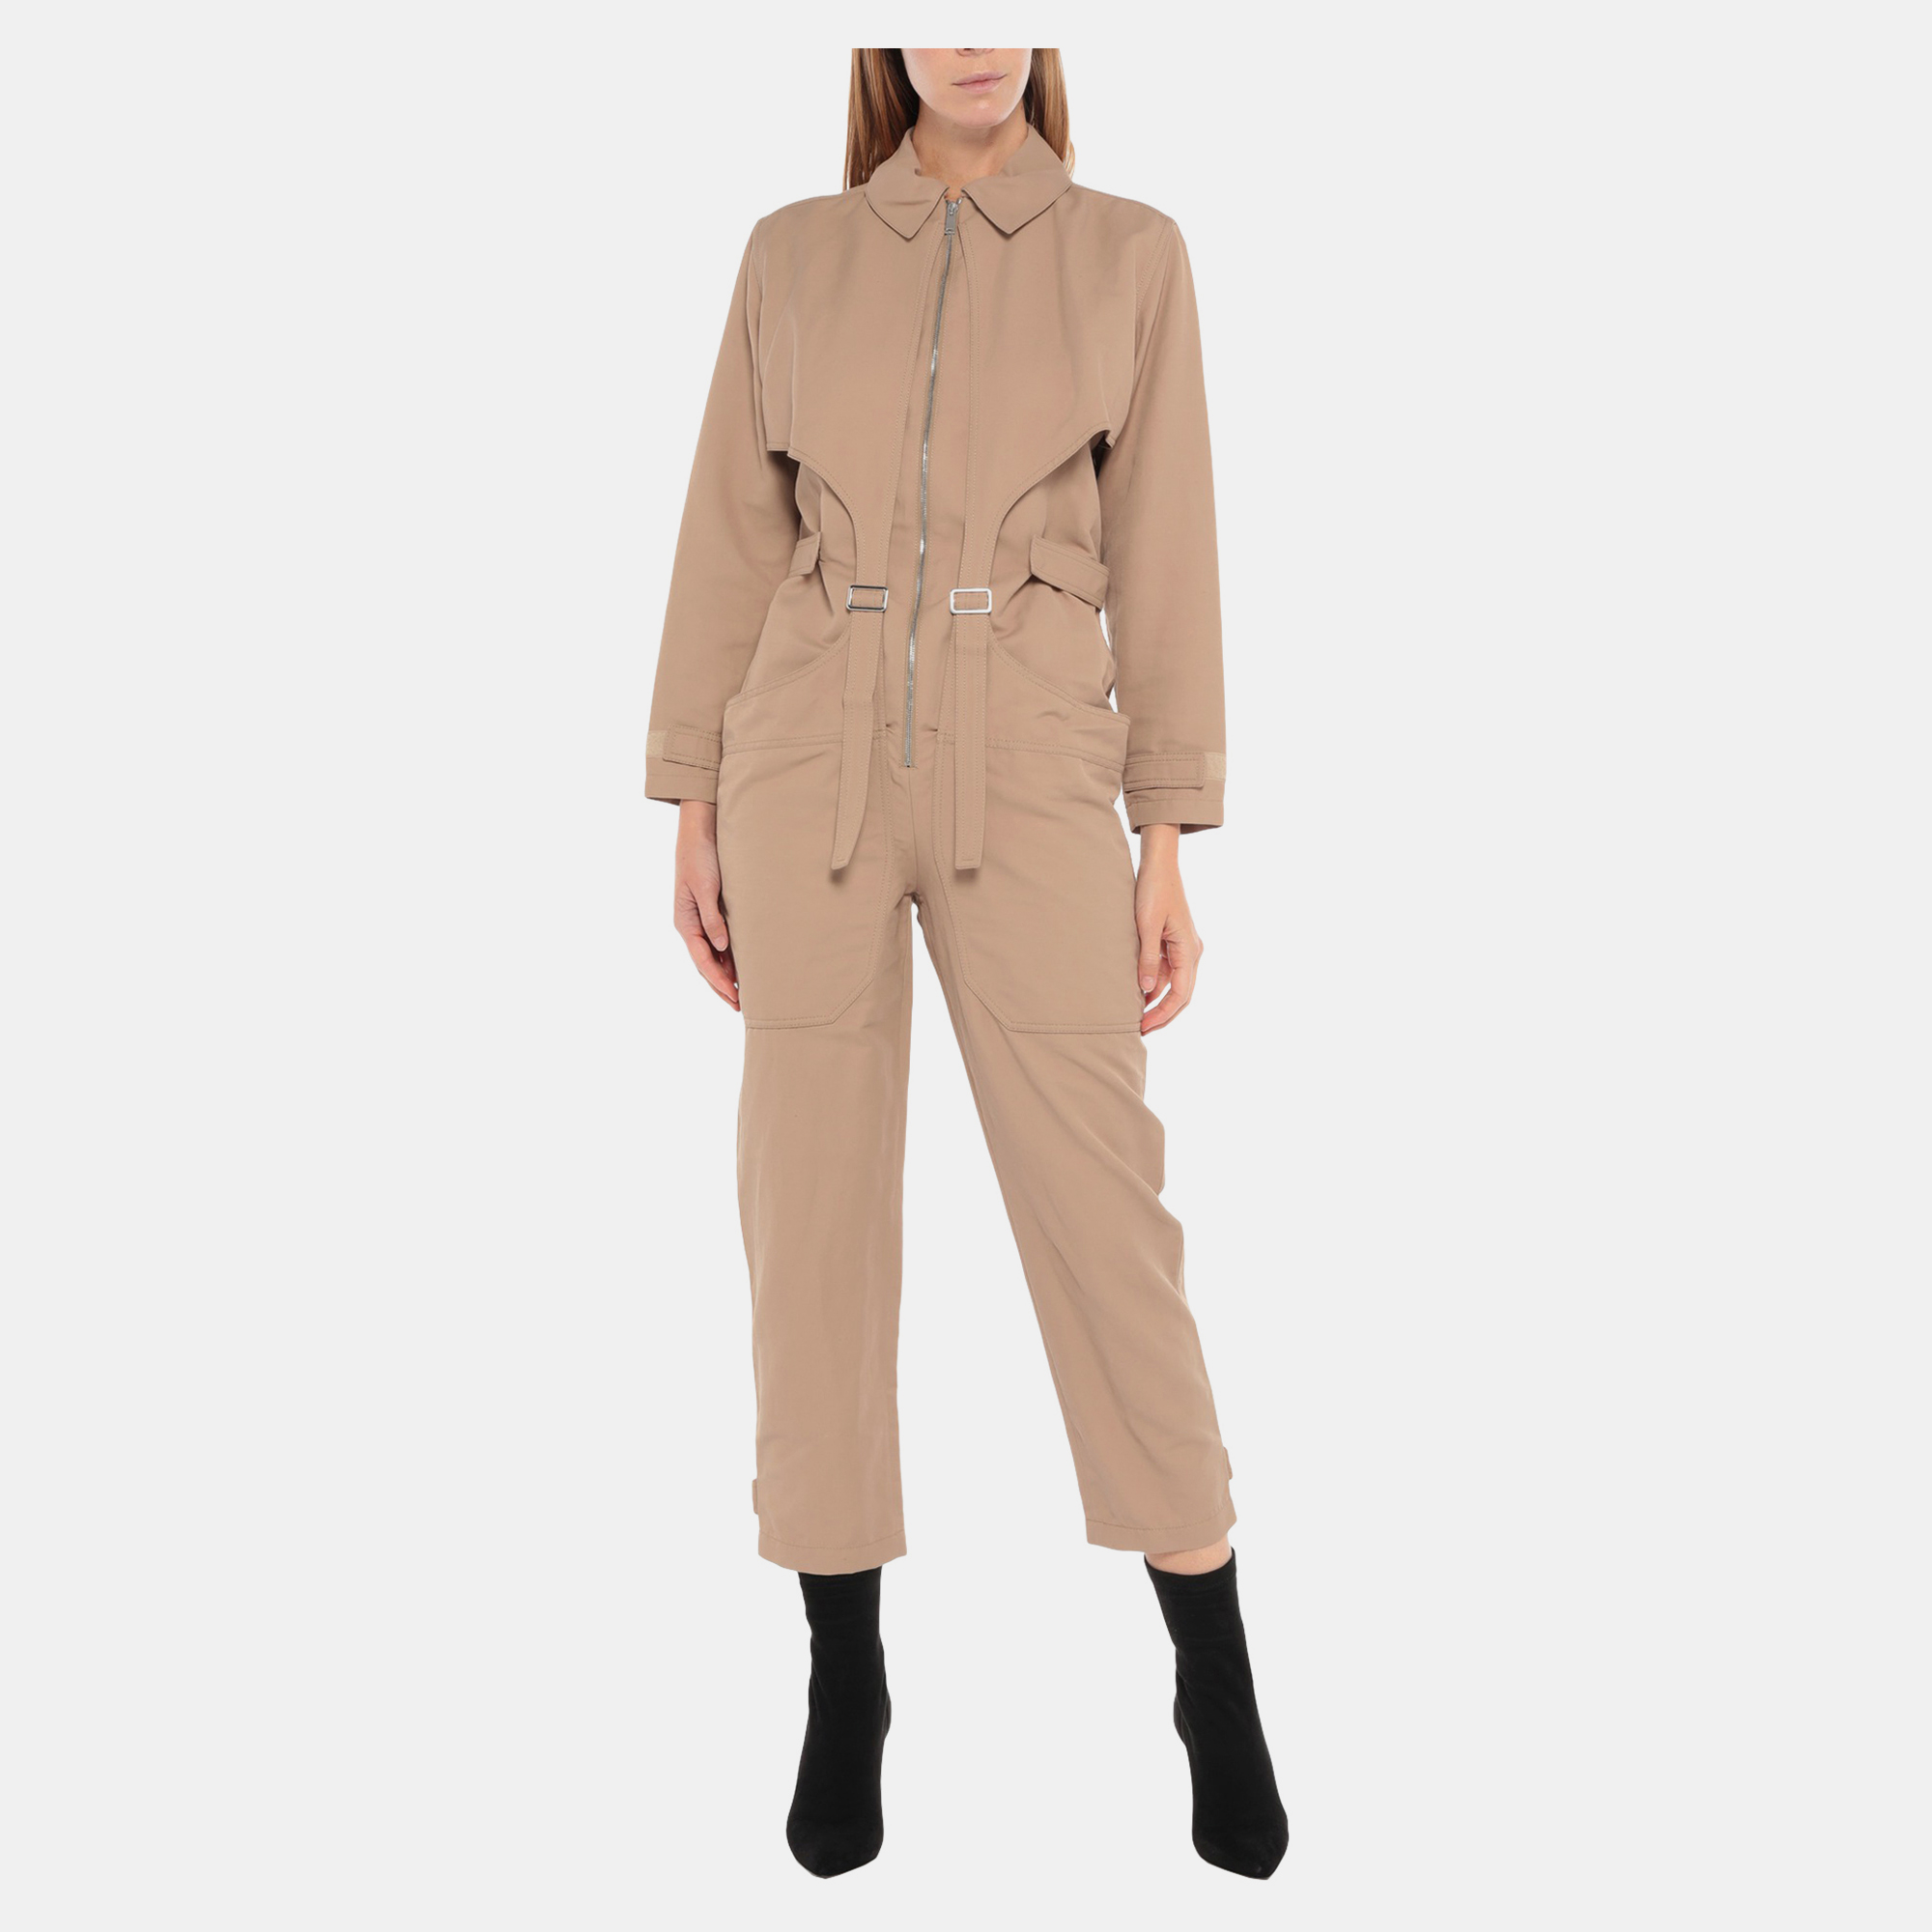 Step into effortless elegance with this designer jumpsuit. Crafted with attention to detail it offers a sleek silhouette and all day comfort.